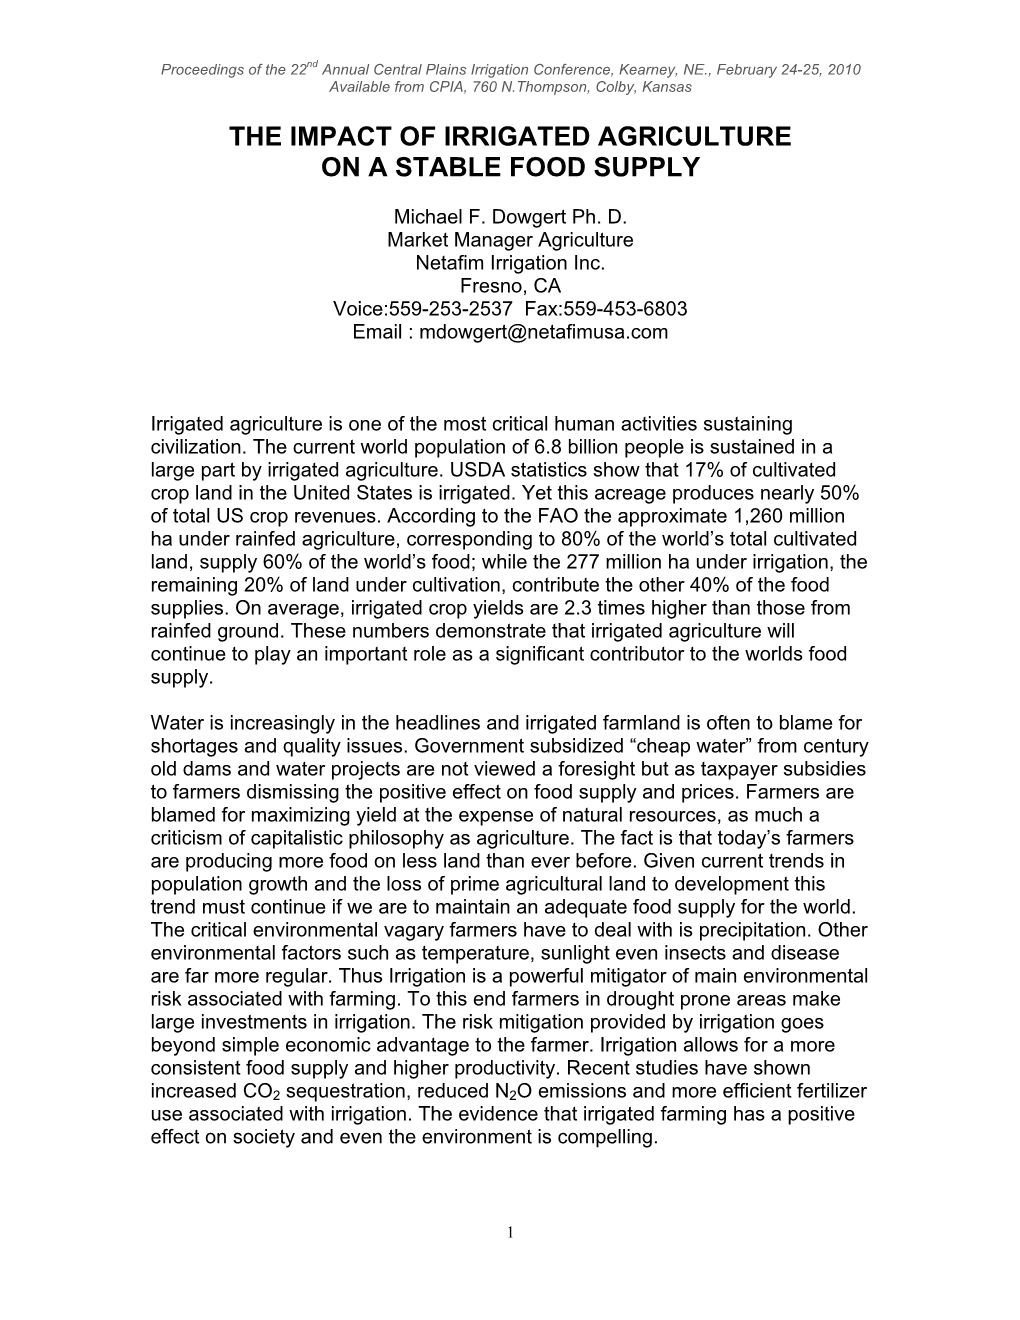 The Impact of Irrigated Agriculture on a Stable Food Supply